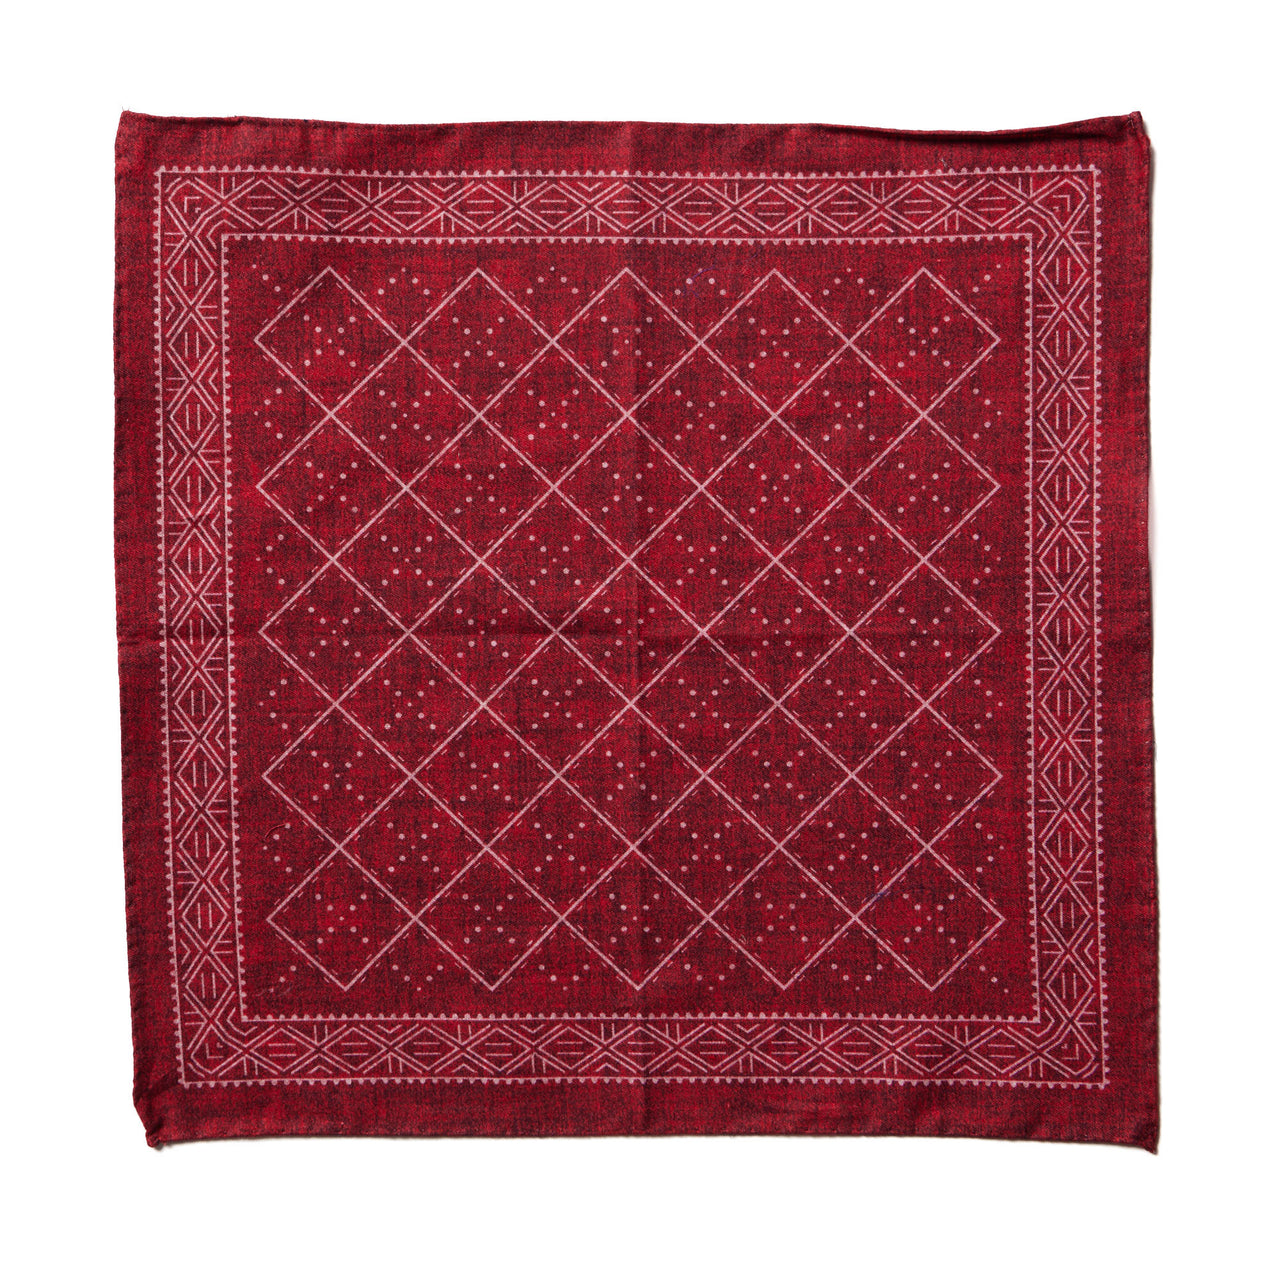 HENRY SARTORIAL X CANTINI Cotton Pocket Square RED